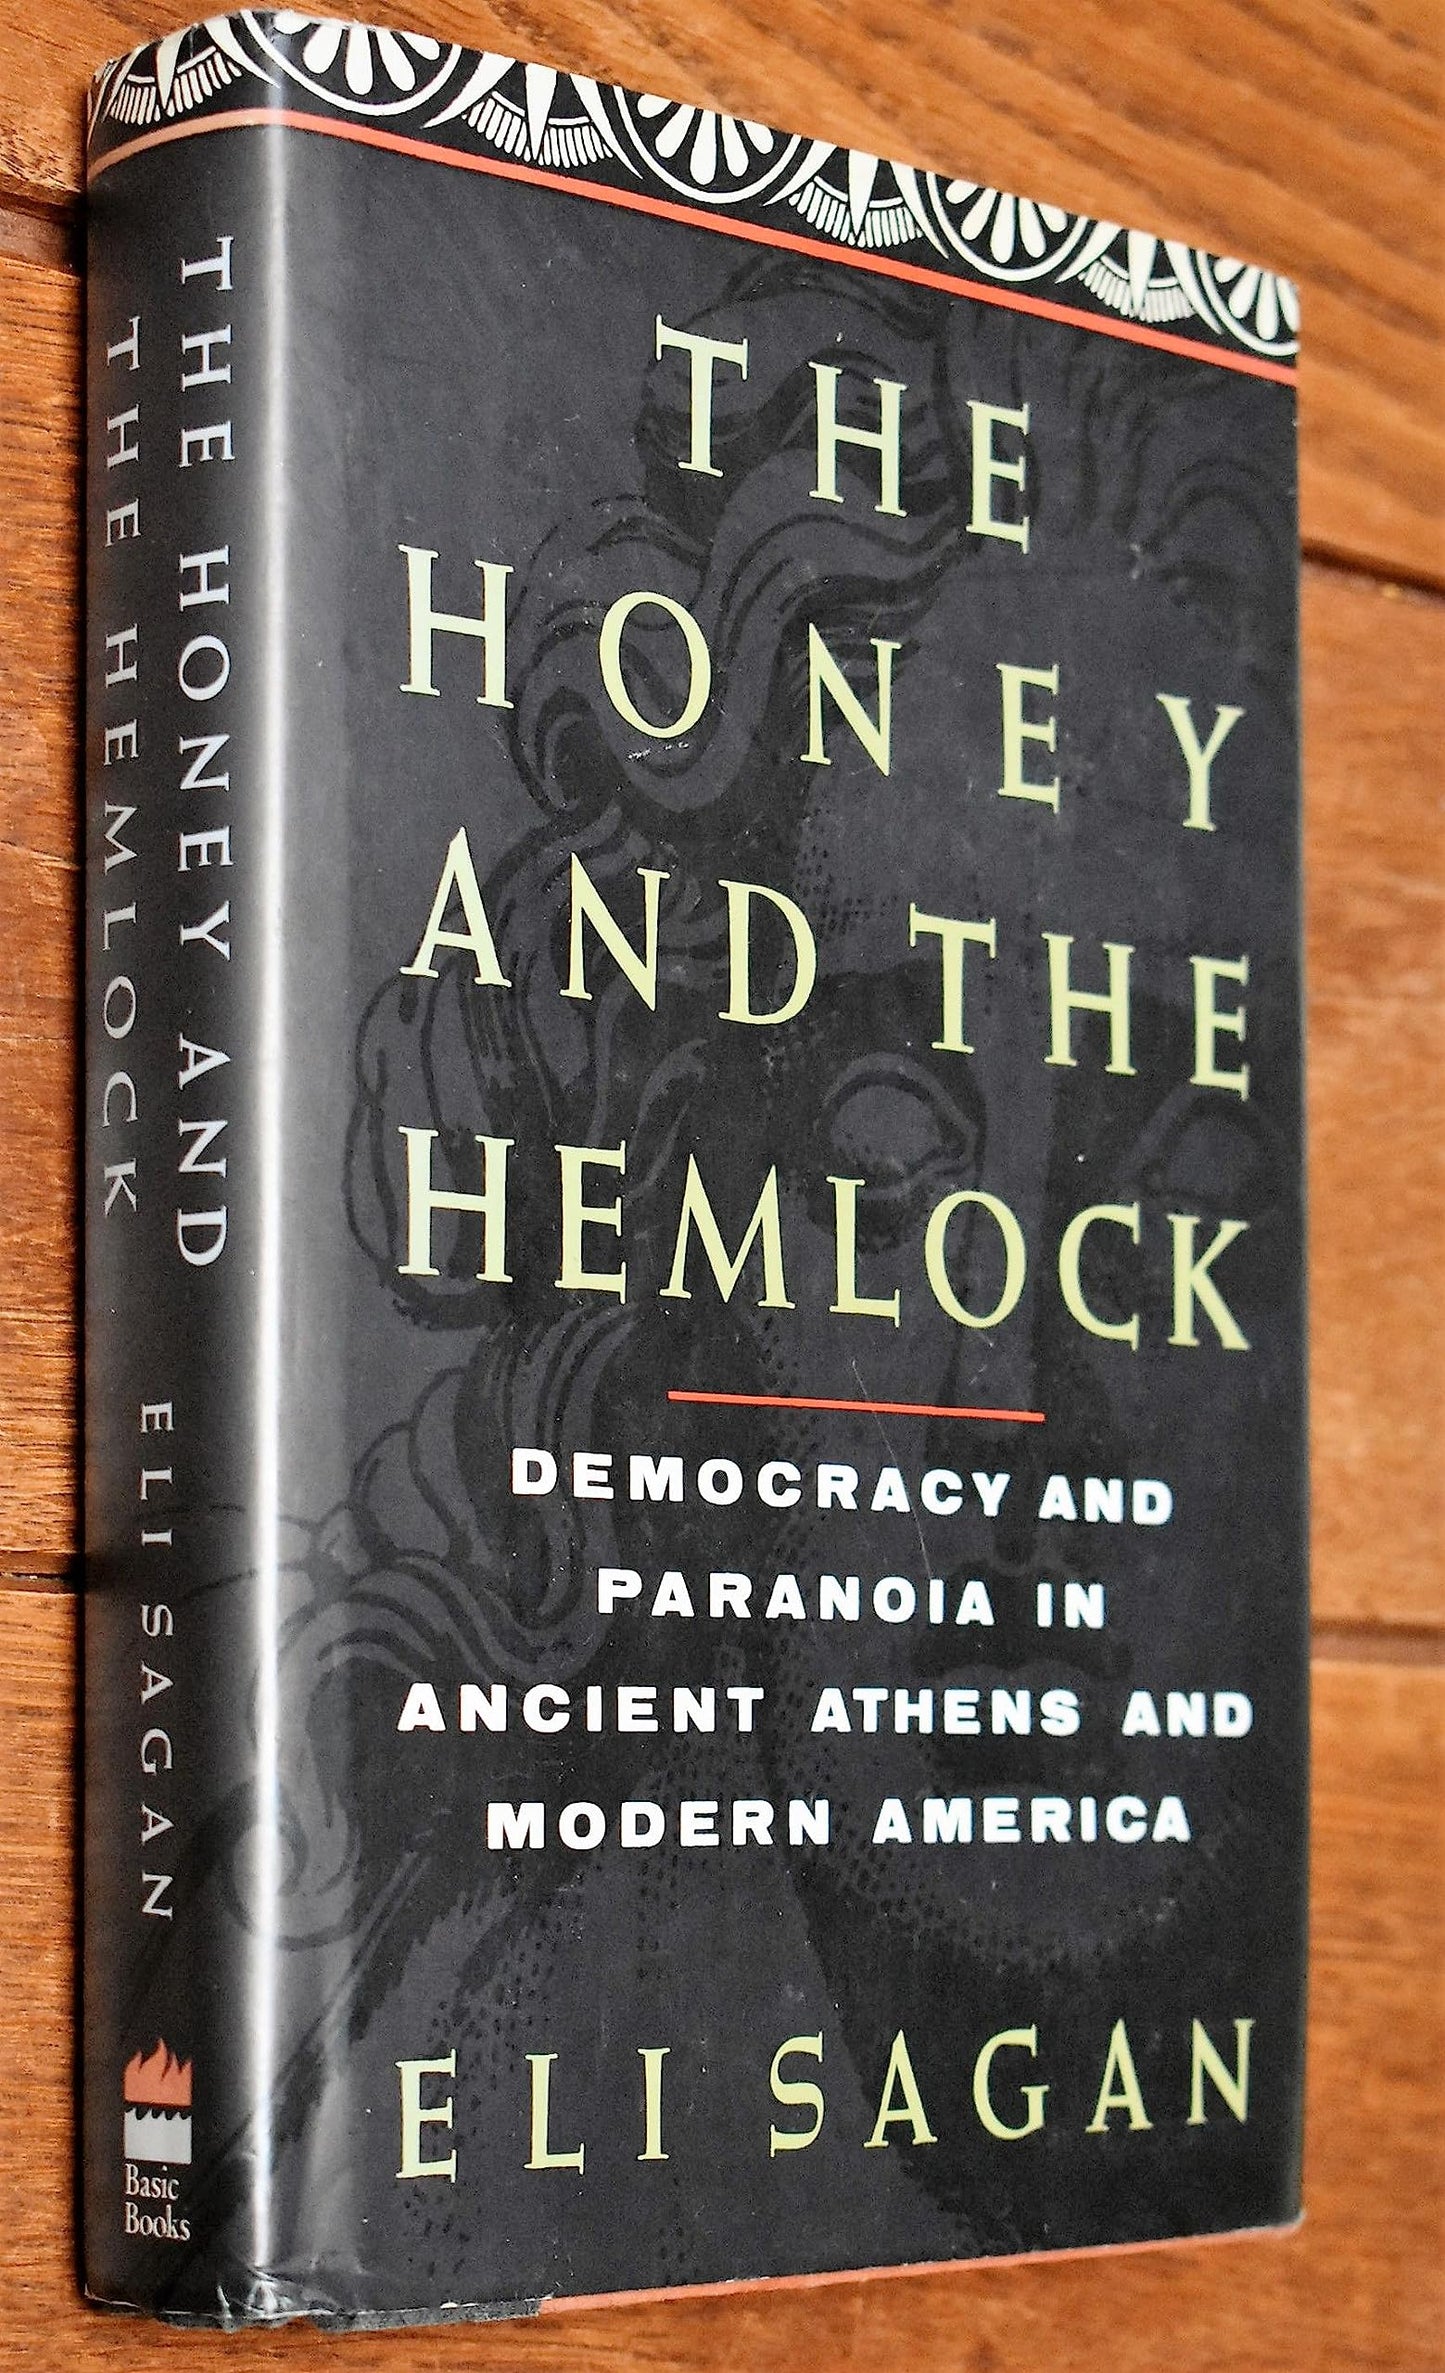 Honey and the Hemlock: Democracy & Paranoia in Ancient Athens & Modern America